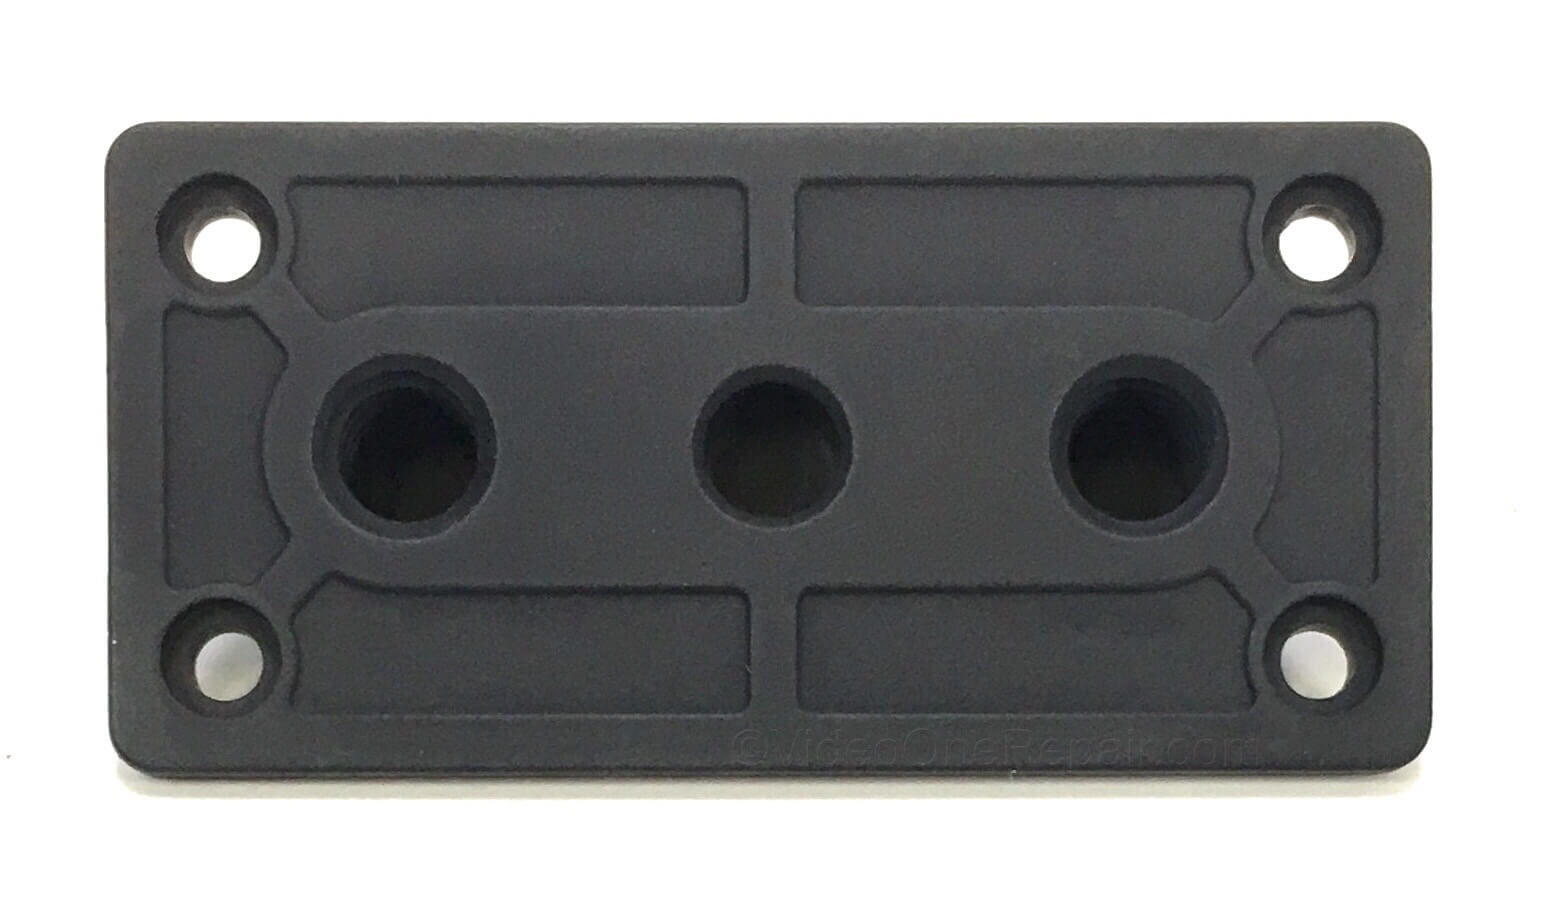 Original Tripod Mount Screw Plate that fits on the Sony NEX-FS700 camcorder. It is a genuine Sony part, sourced directly from Sony USA. Brand new factory fresh. Free Shipping.